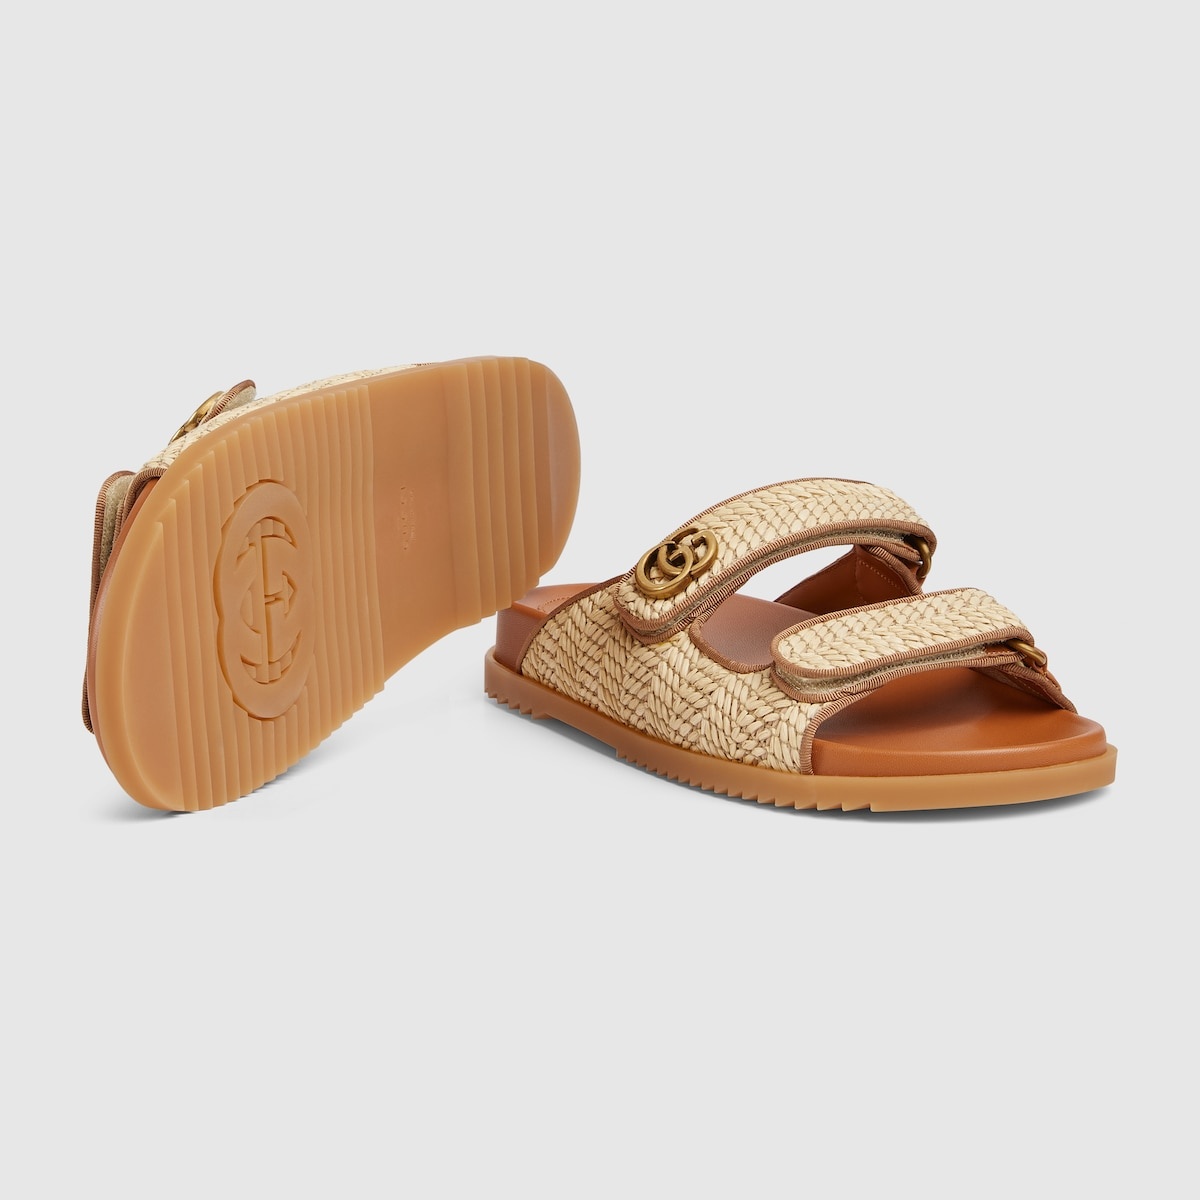 Women's sandal with Double G - 6